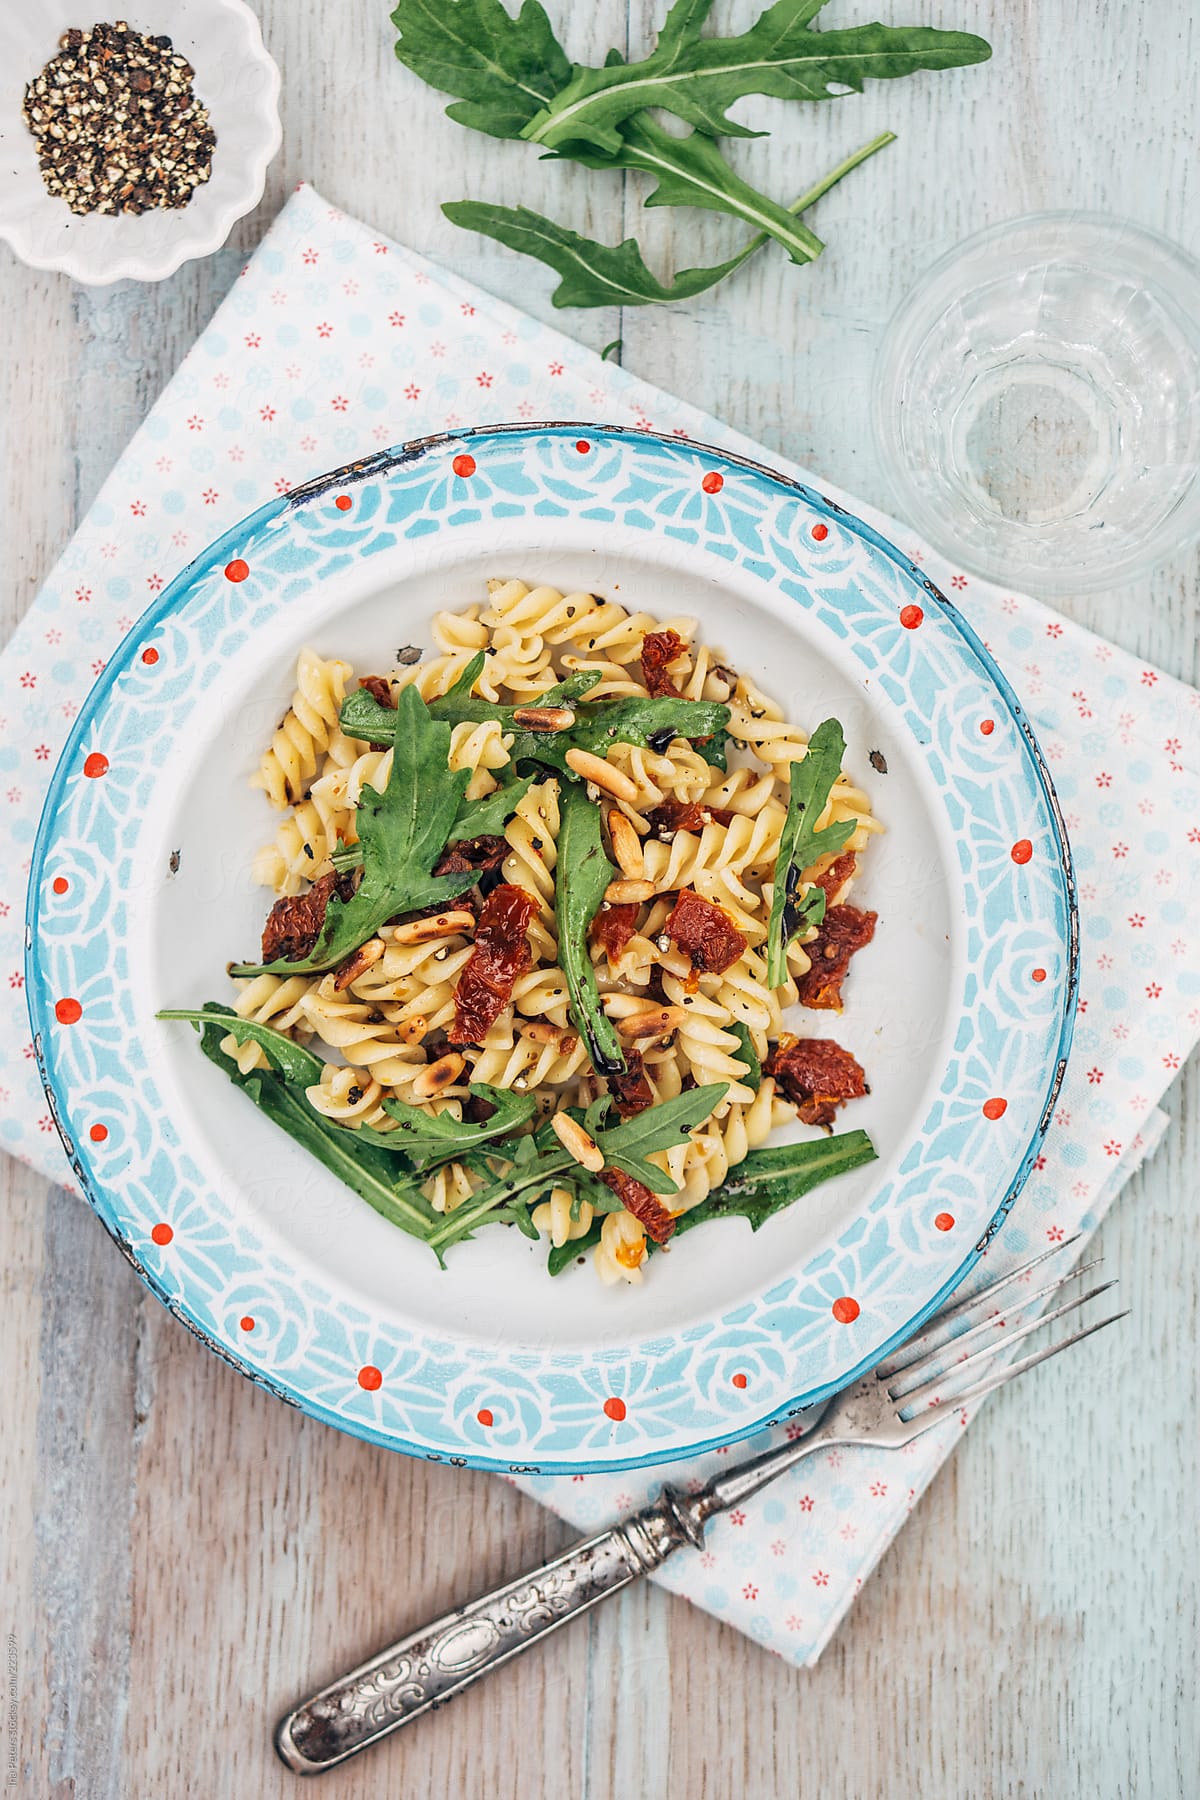 Food: Summer Salad with Noodles, dried tomato, rocket, roasted pine nuts and balsamico